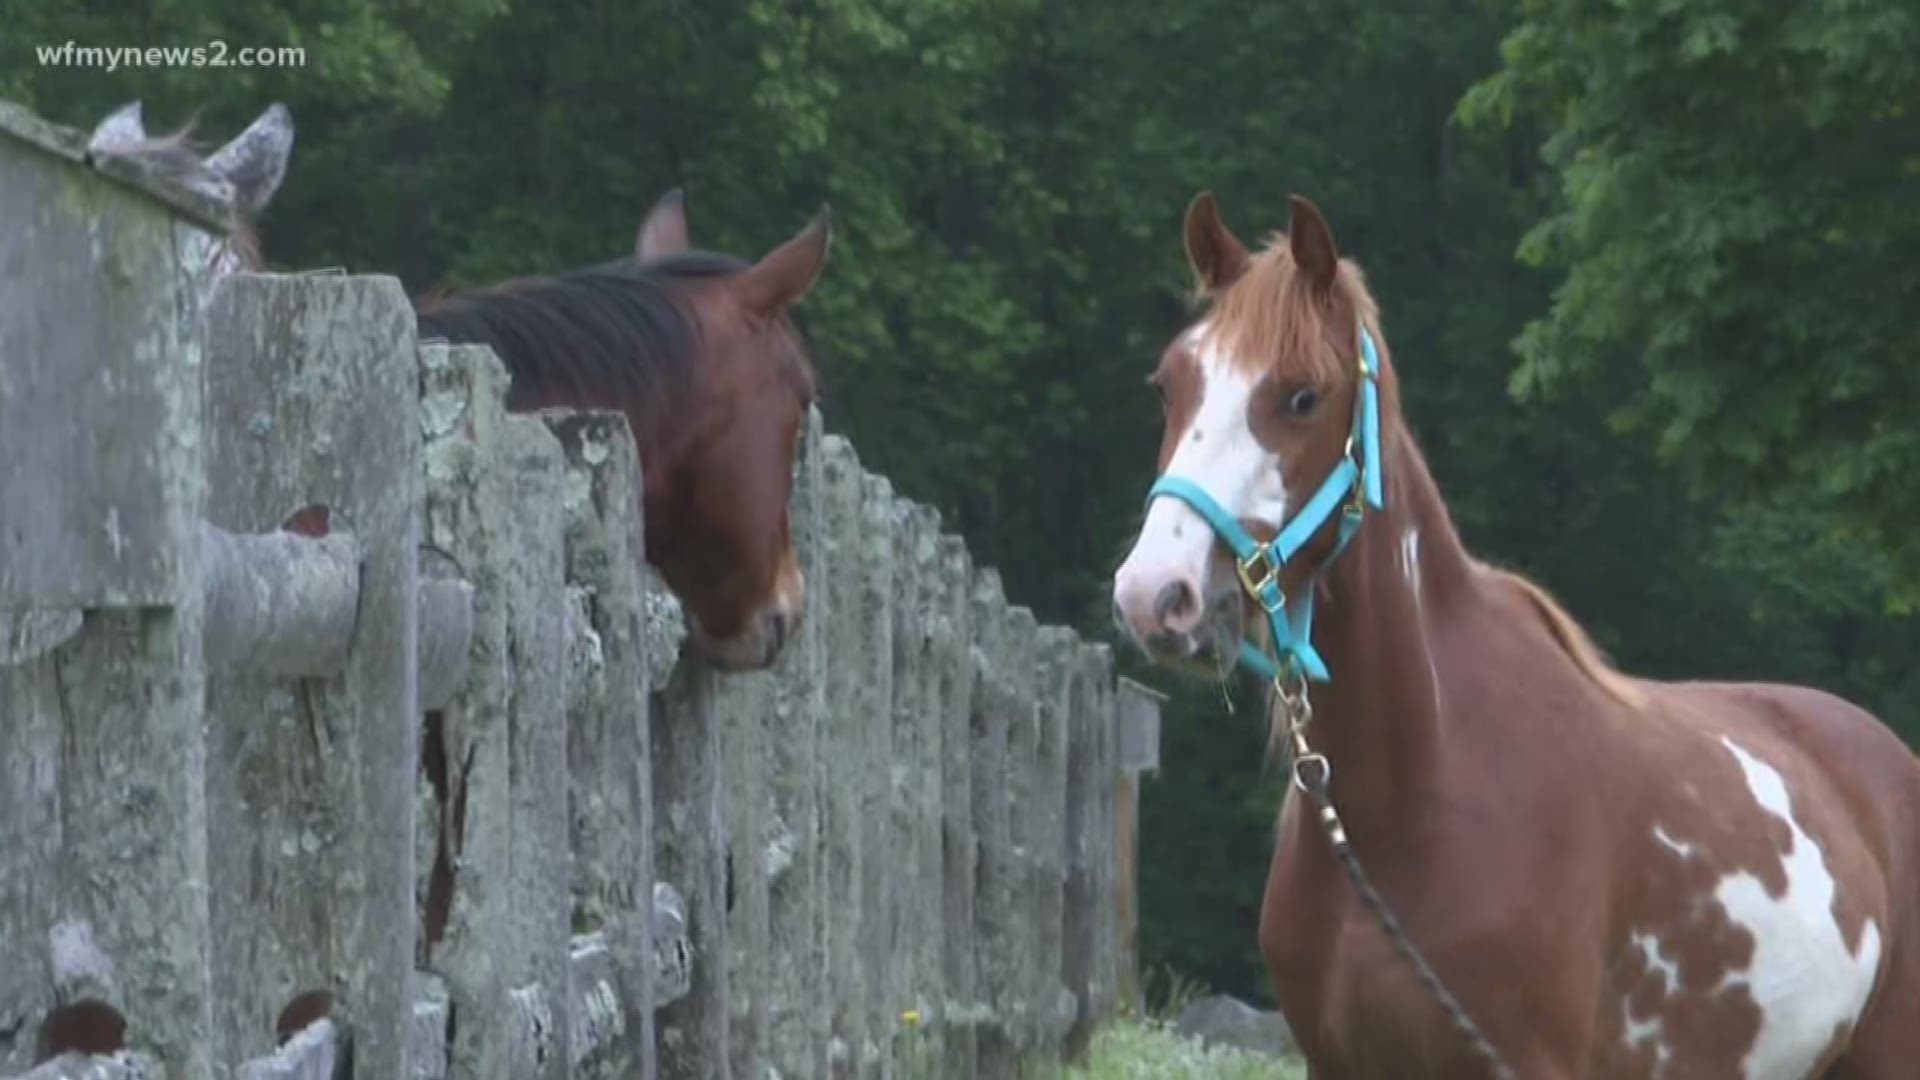 HERO Horse Rescue in Forsyth County saves and rehabilitates some of the most abused and neglected horses in North Carolina, but it desperately needs more volunteers to help operate and expand the farm.